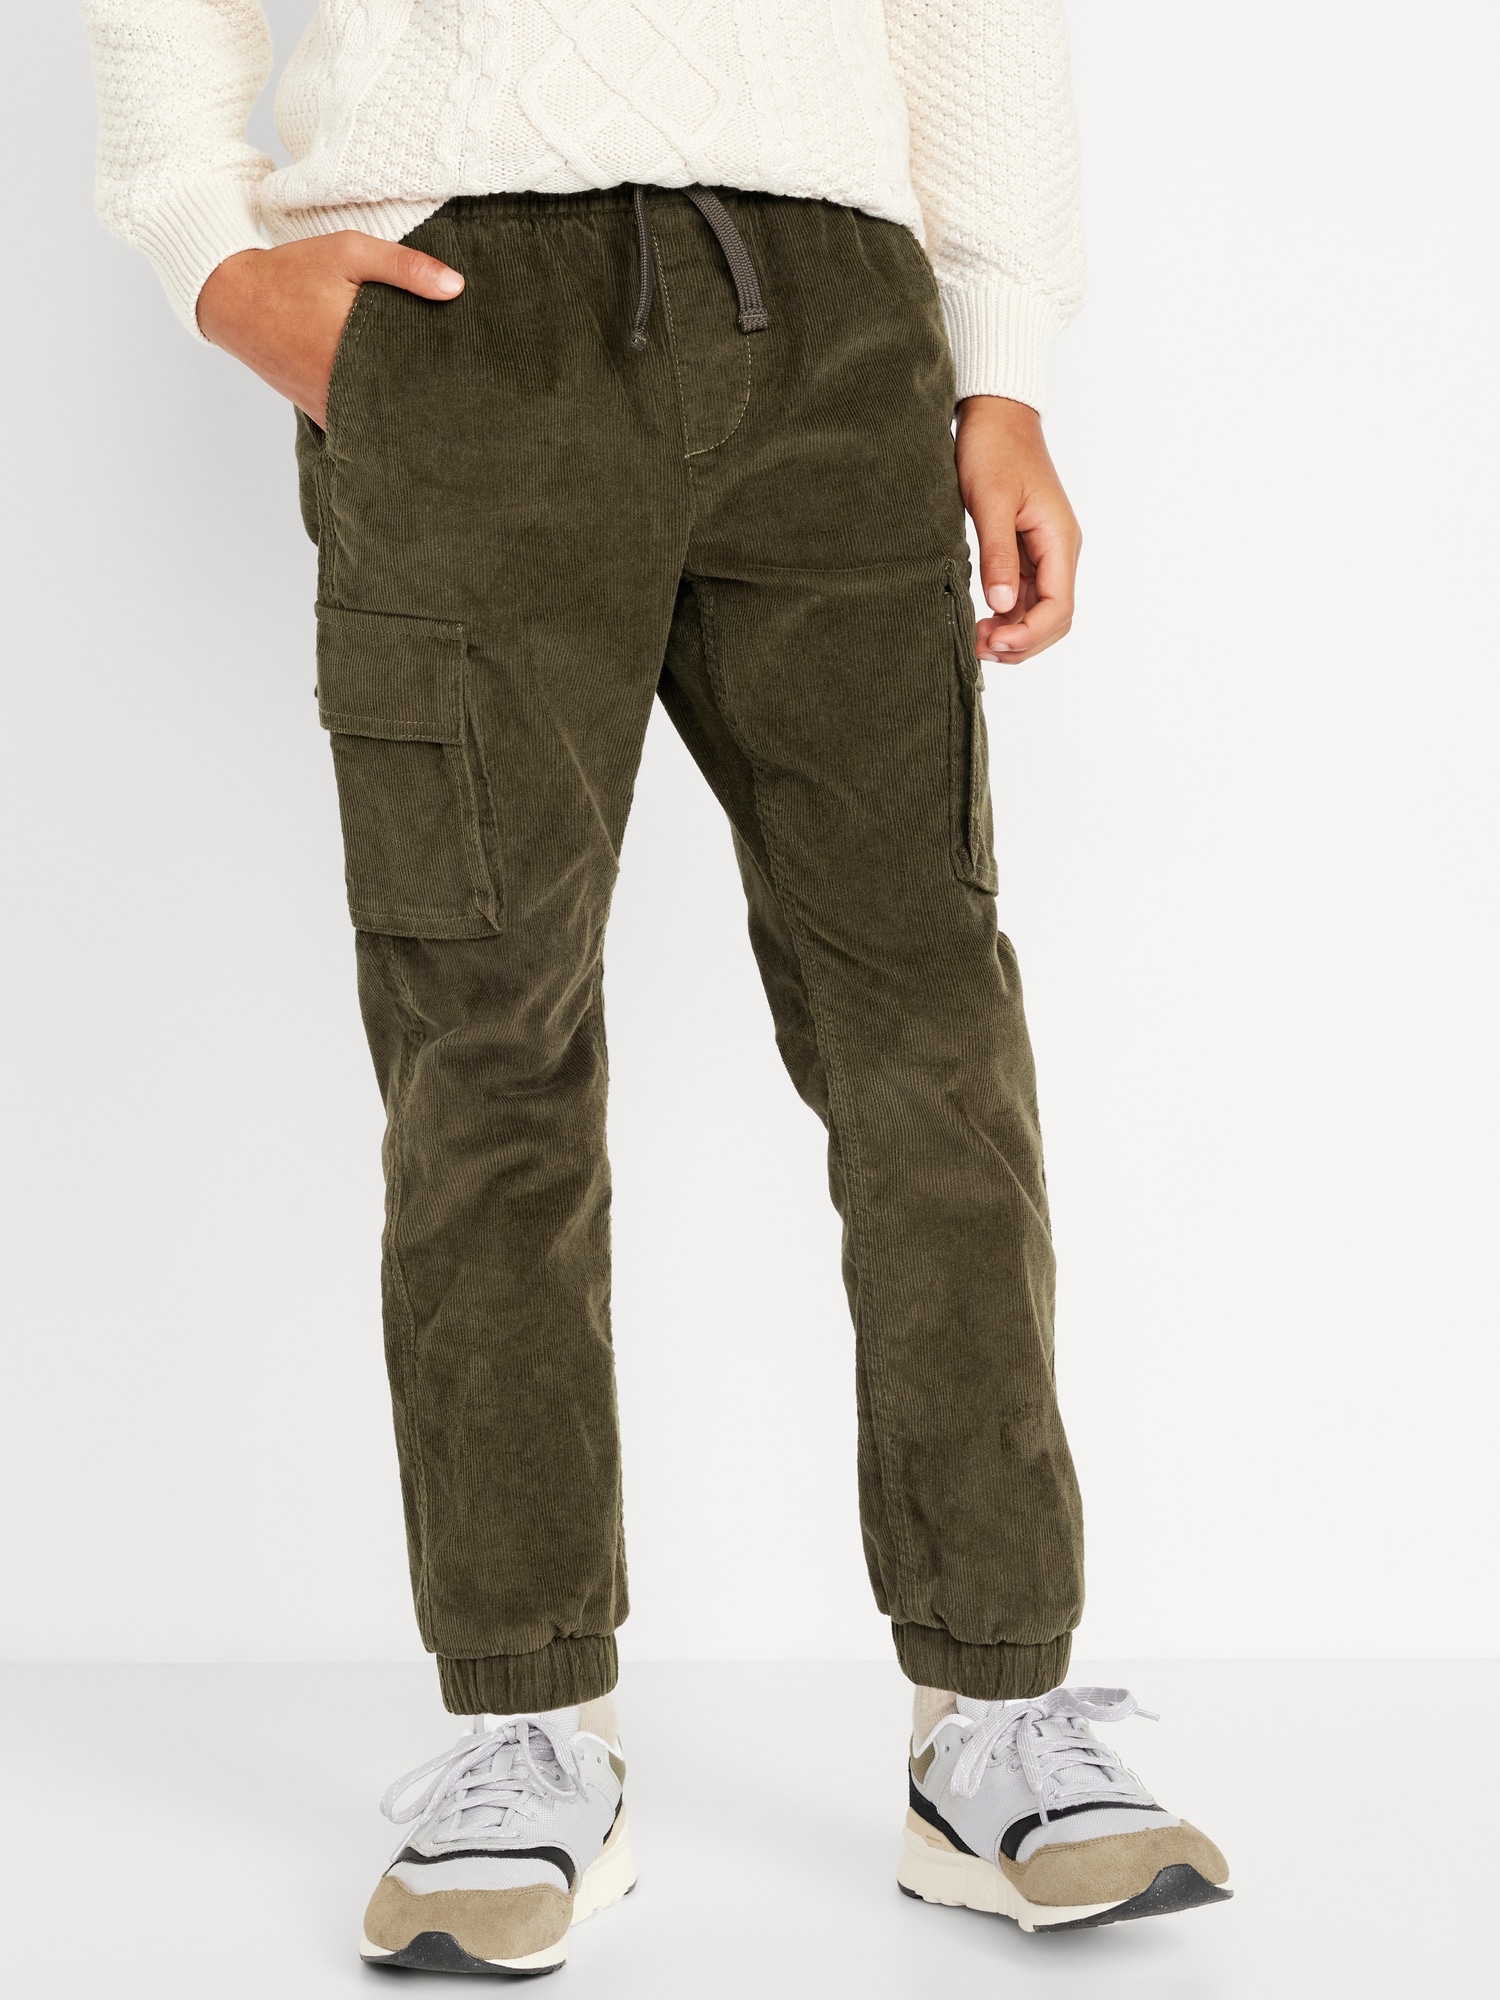 Southpole Basic Cargo Long Pant With Color Matching Belt, $50, .com